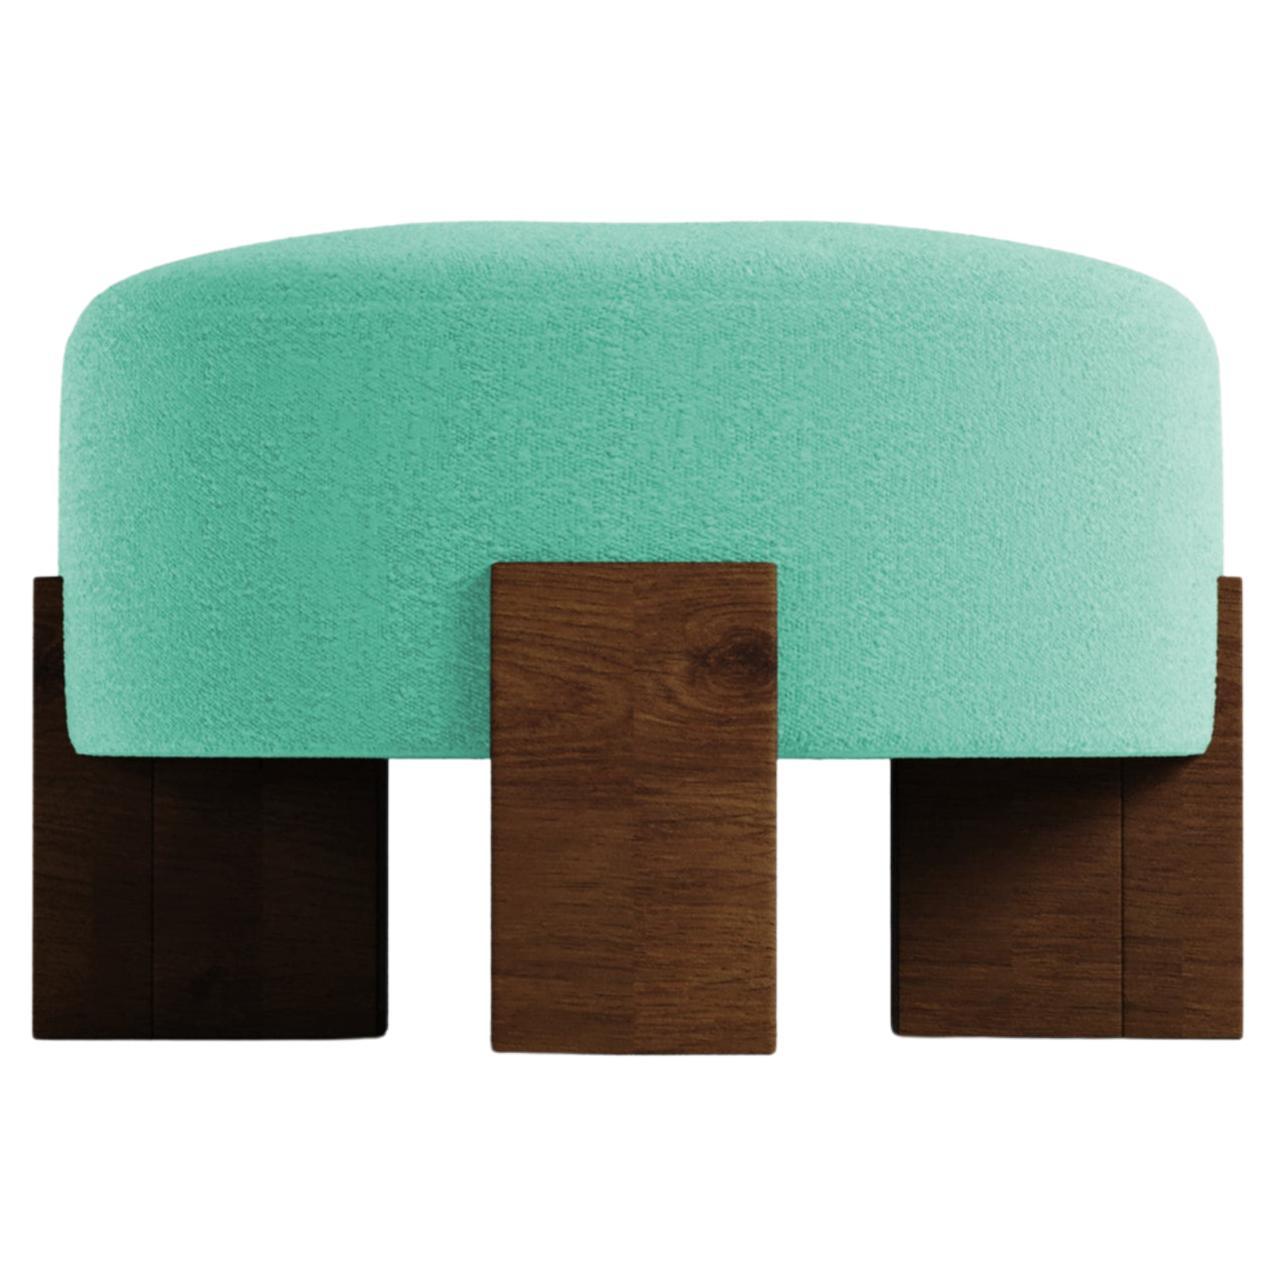 Collector Contemporary Cassete Puff in Boucle Teal by Alter Ego Studio